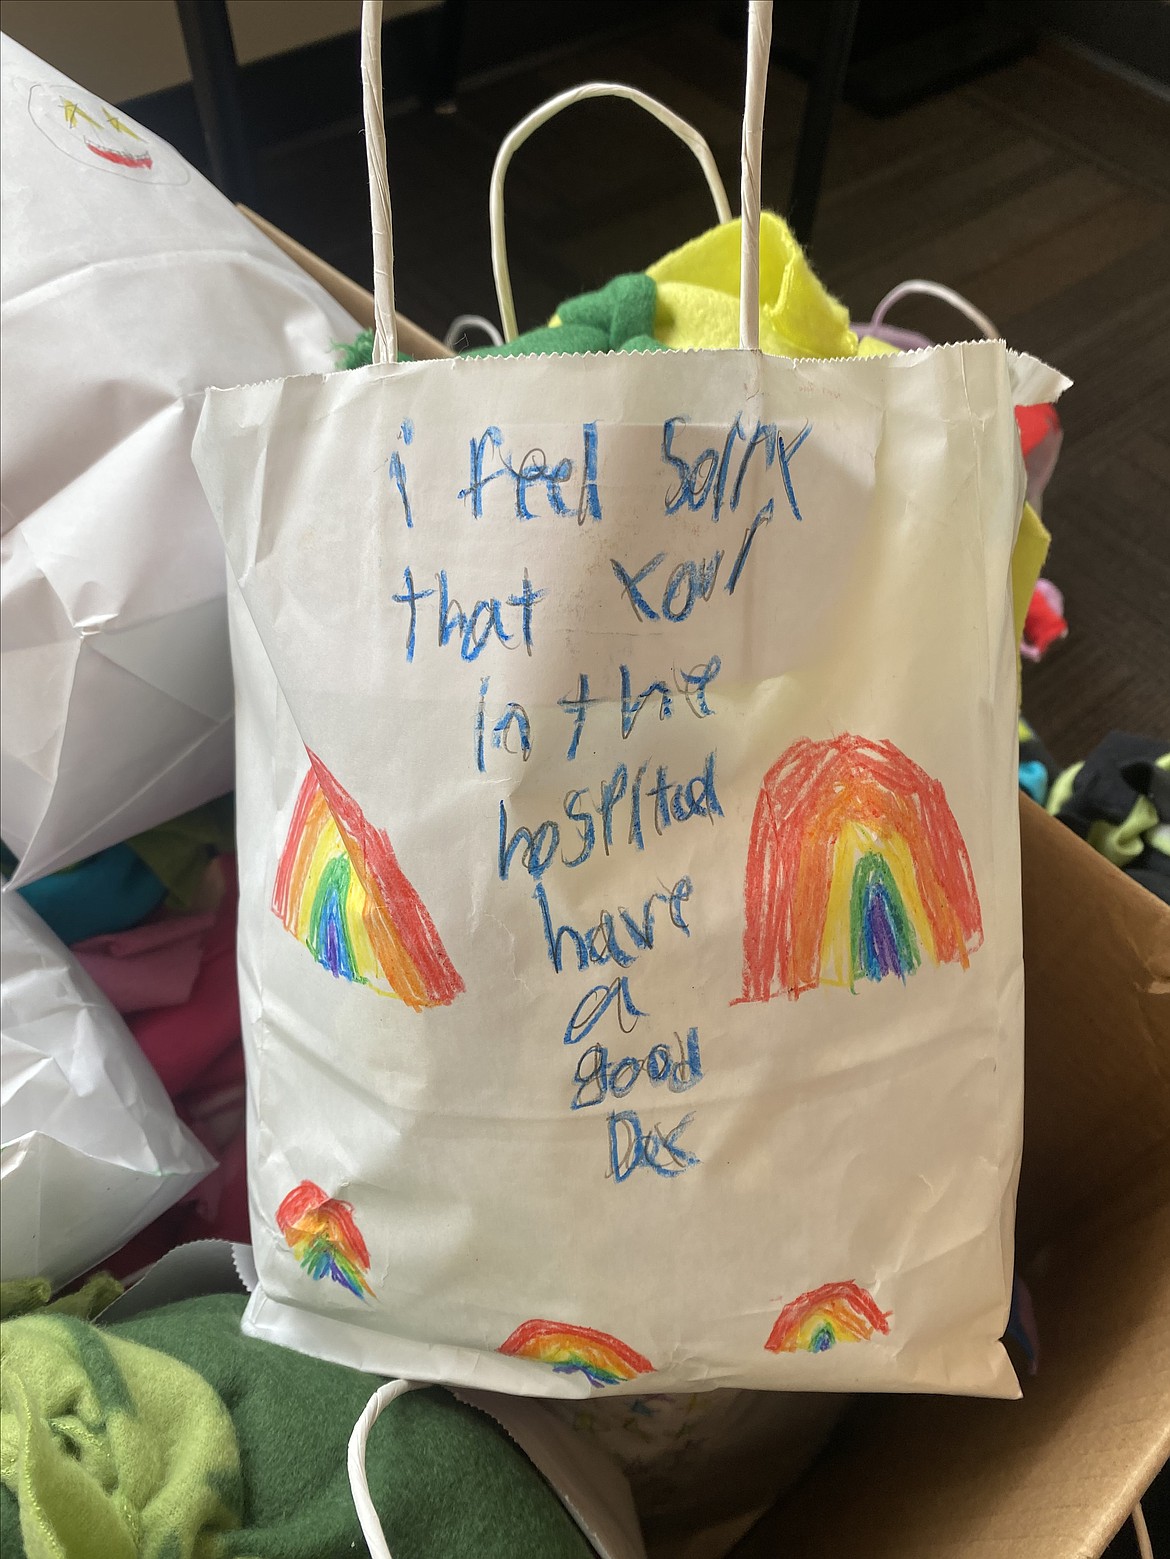 A personalized note is seen on one of many bags Growing the STEM participants used to deliver blankets and messages of kindness to kids hospitalized at Kootenai Health for their Blankets Building Benevolence project.